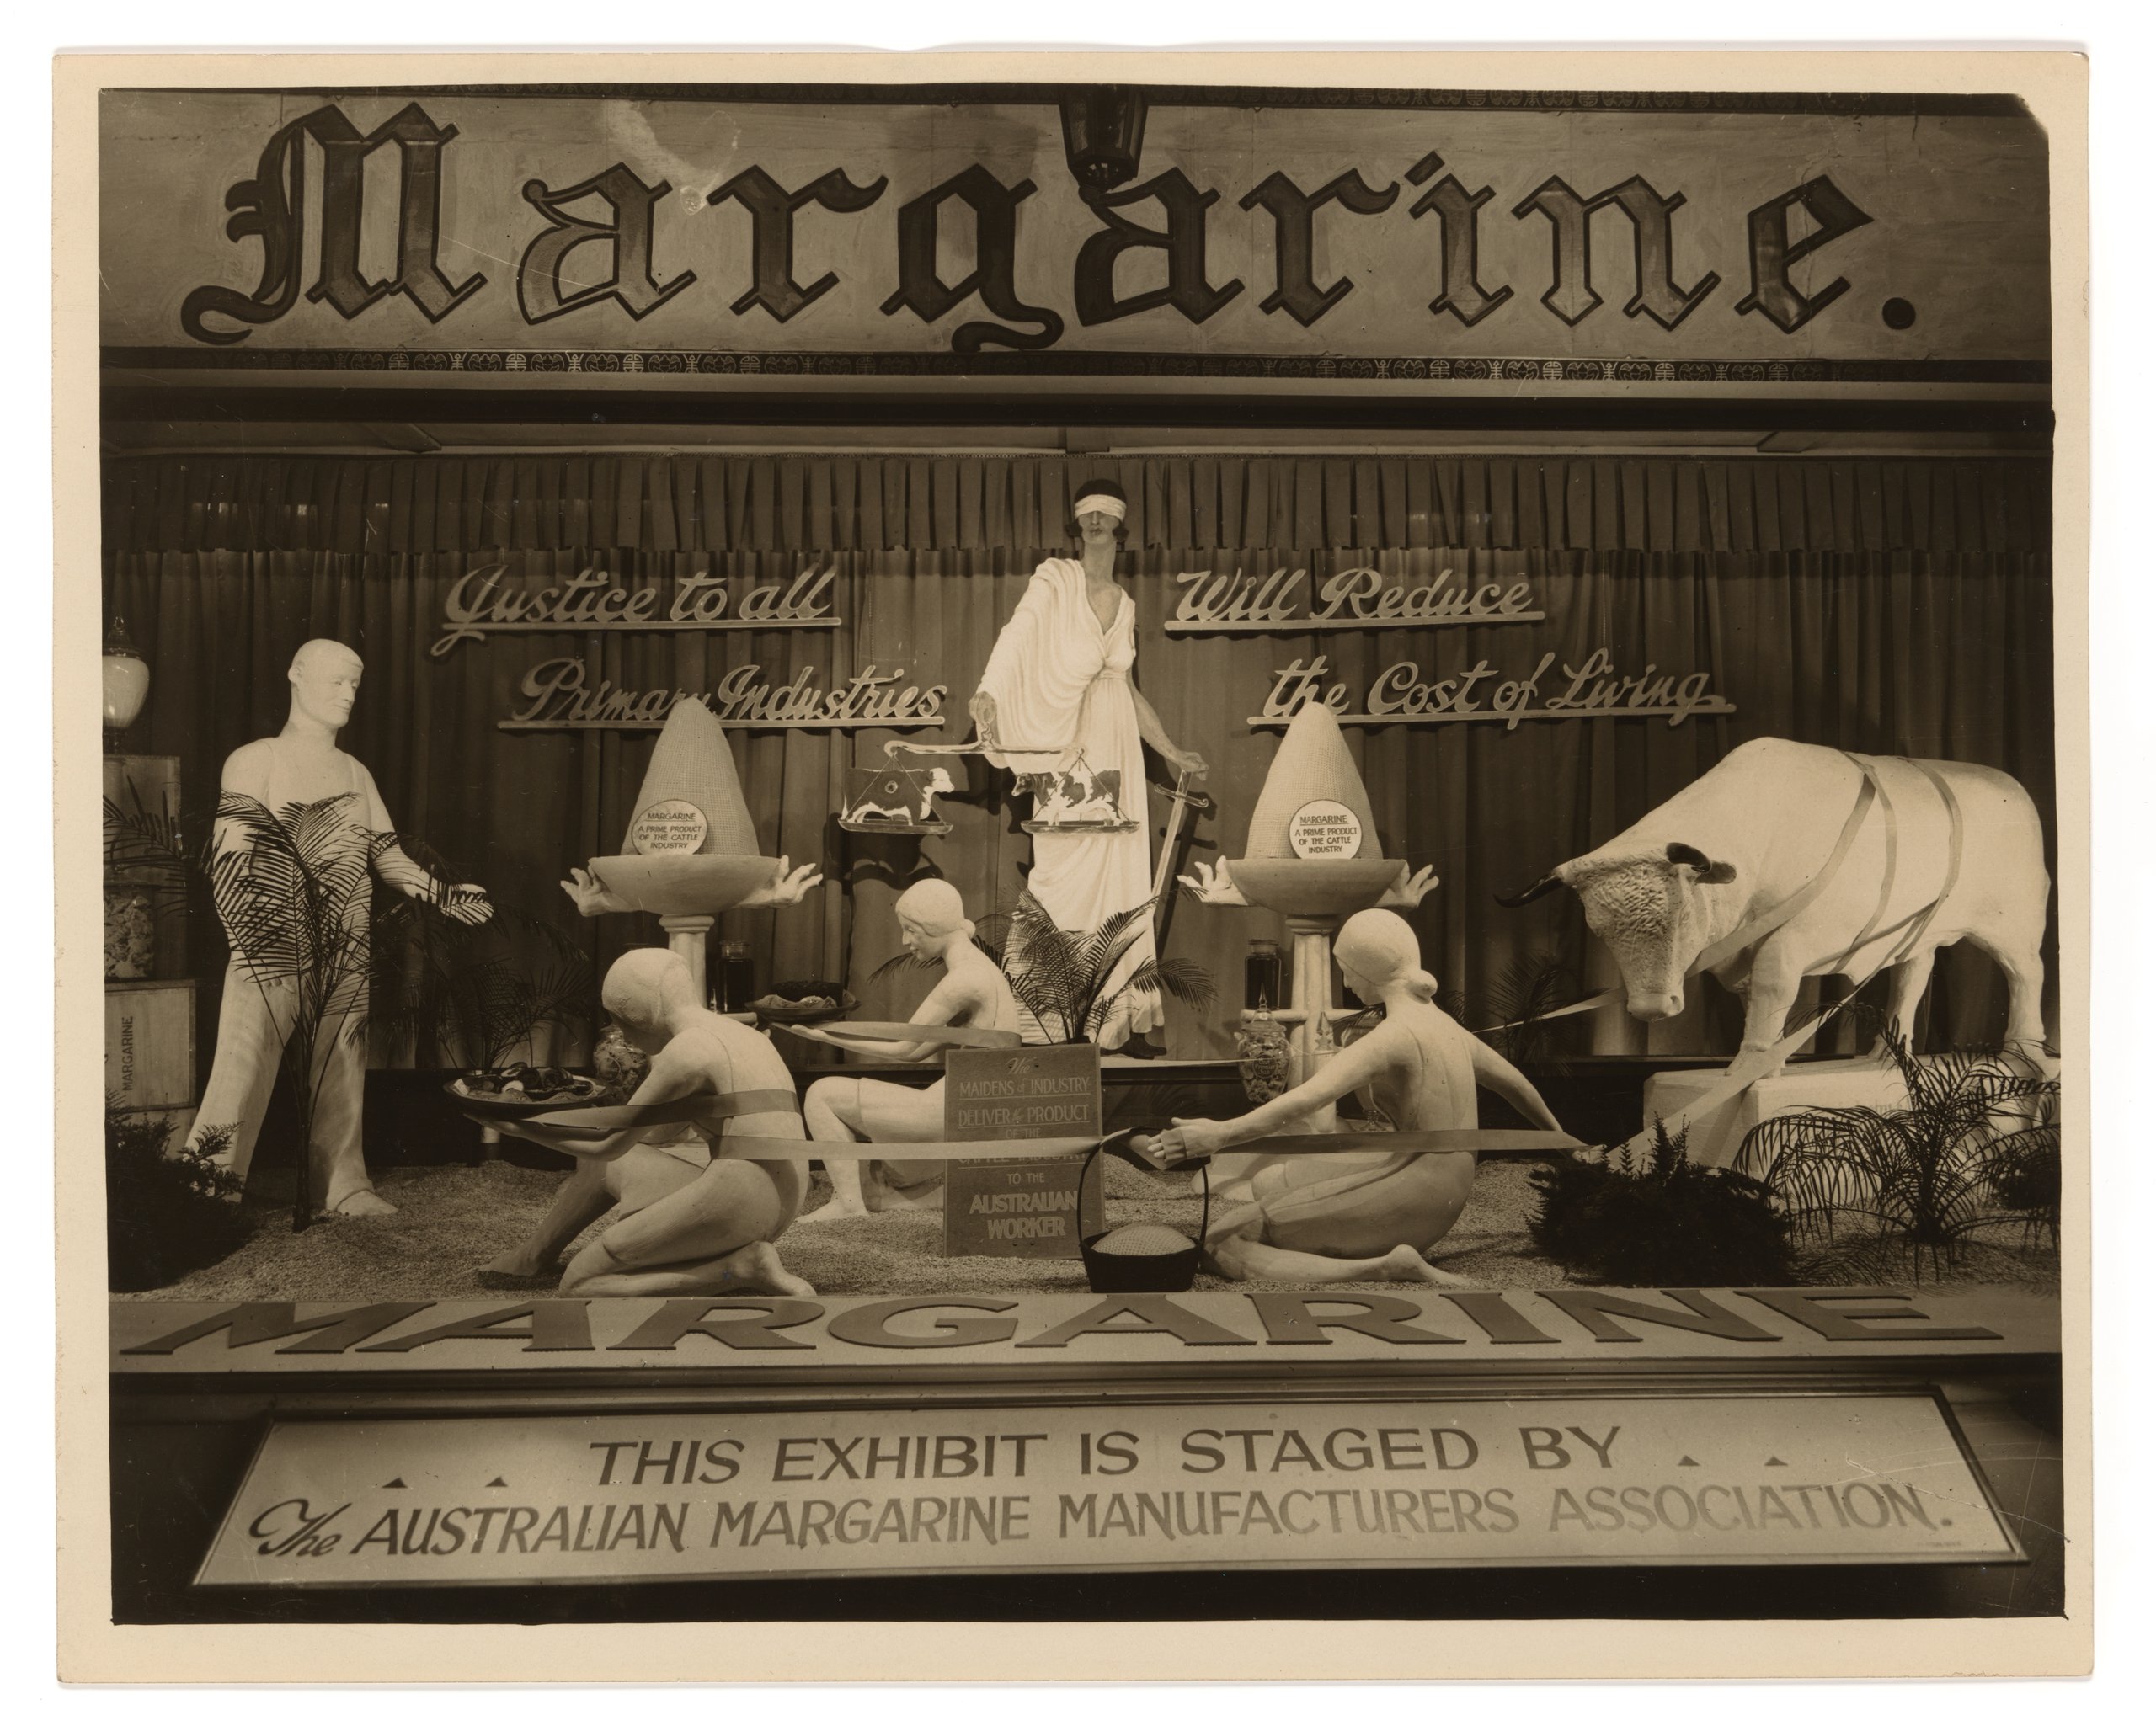 Photograph of promotional exhibit for The Australian Margarine Manufacturers Association at Sydney Royal Easter Show